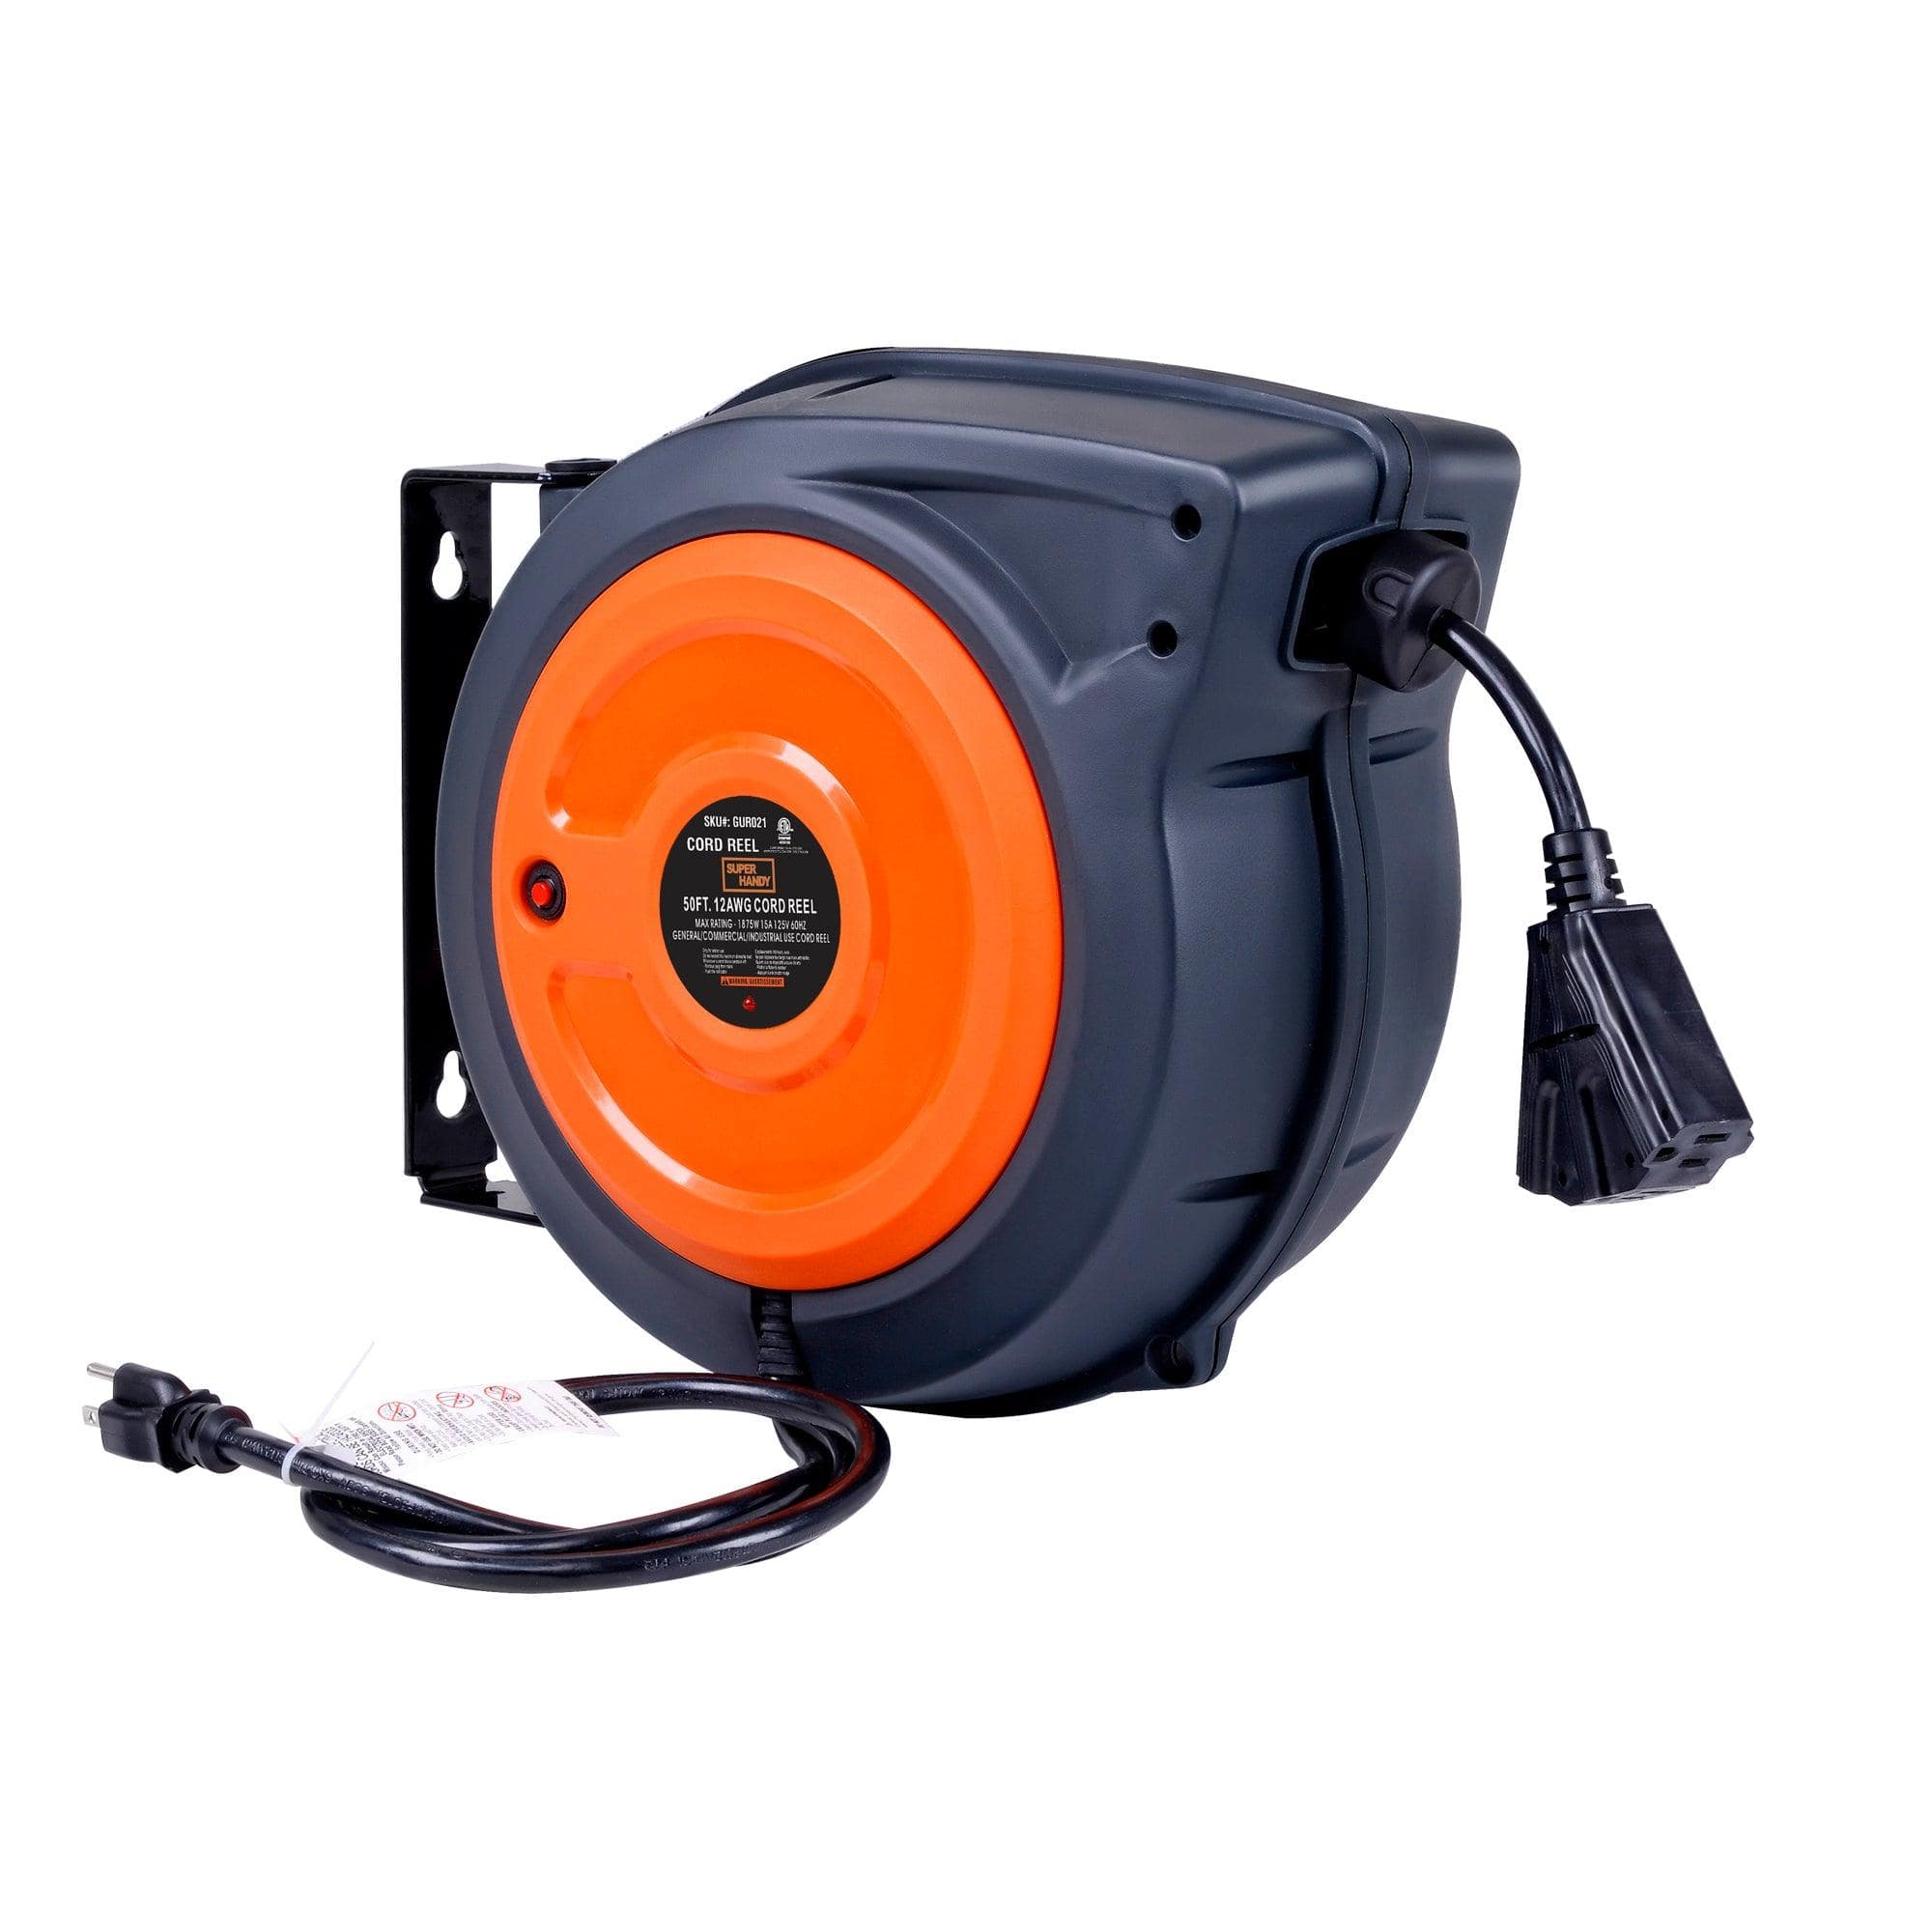 Heavy Duty Automatic Retractable Power Cord Reel - 65FT 12AWG - Versatile